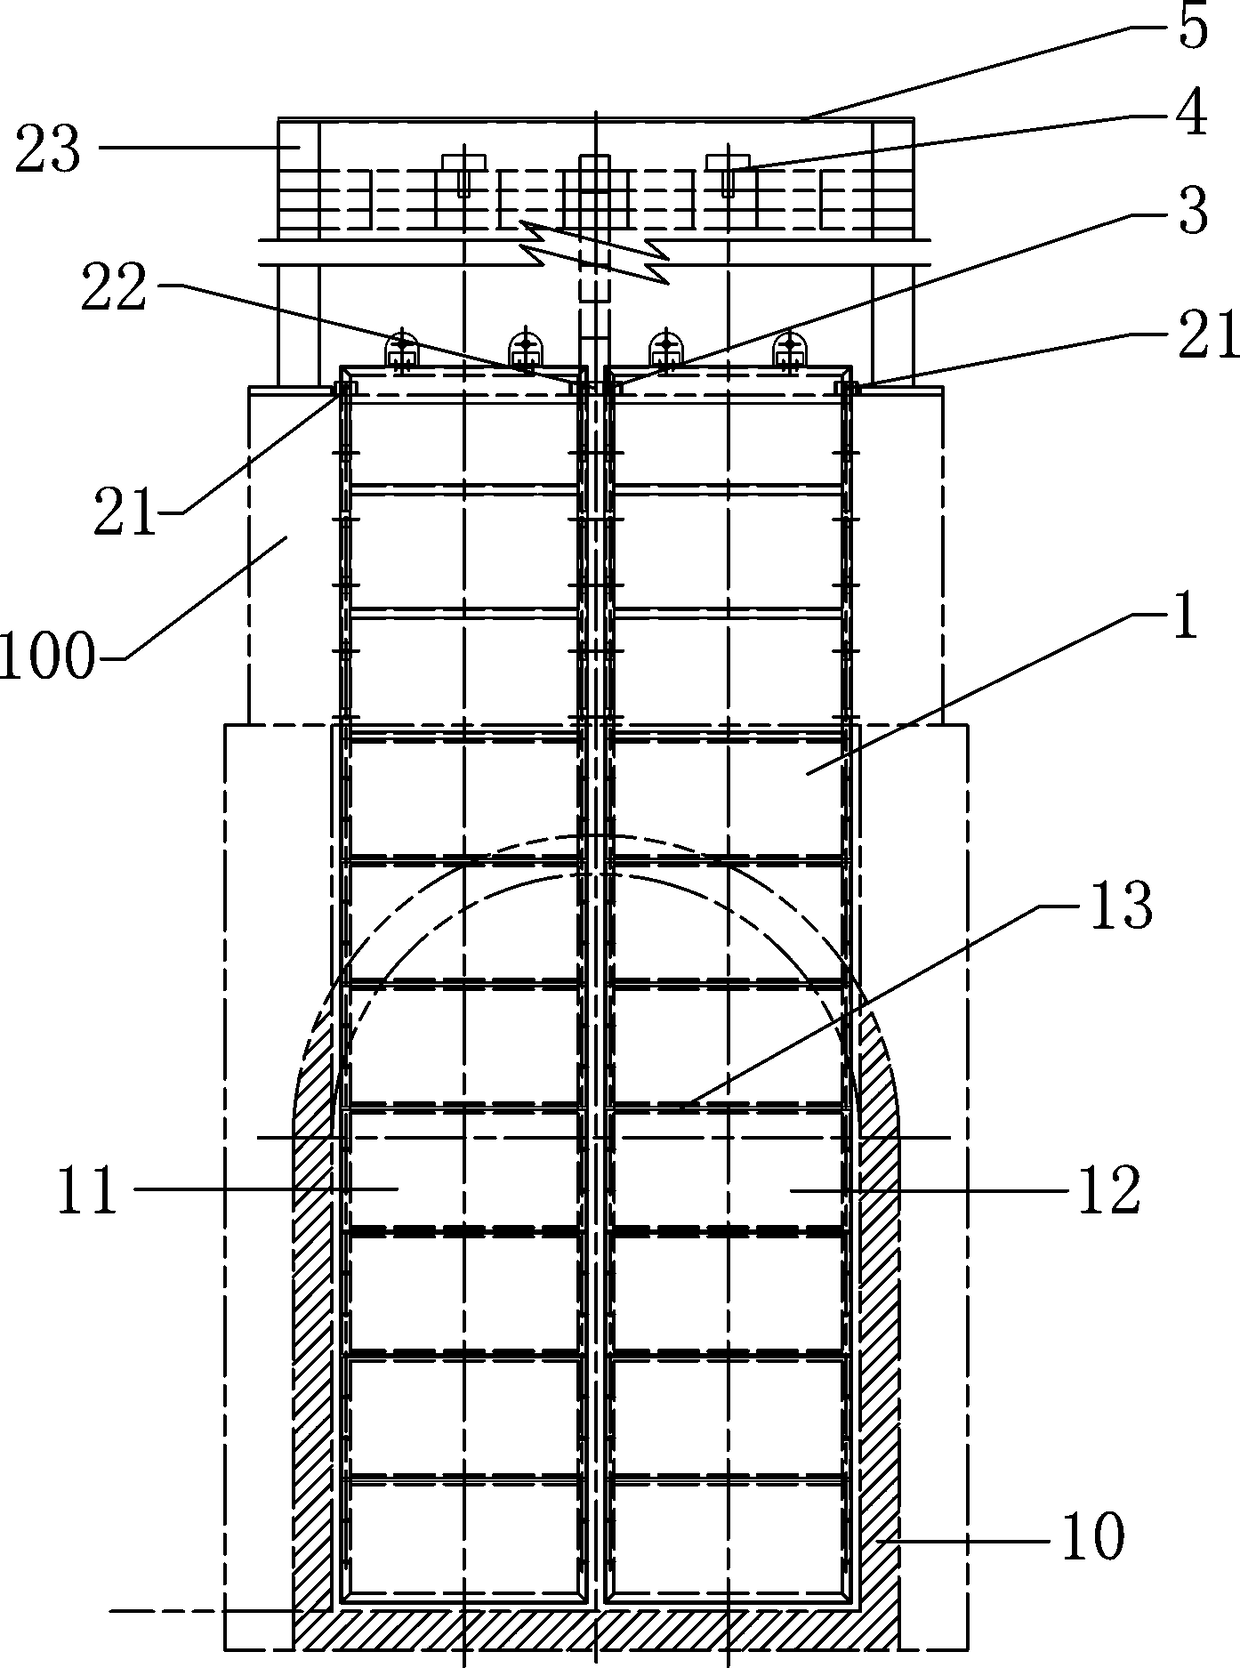 Coke oven flue suction adjusting device and its application method